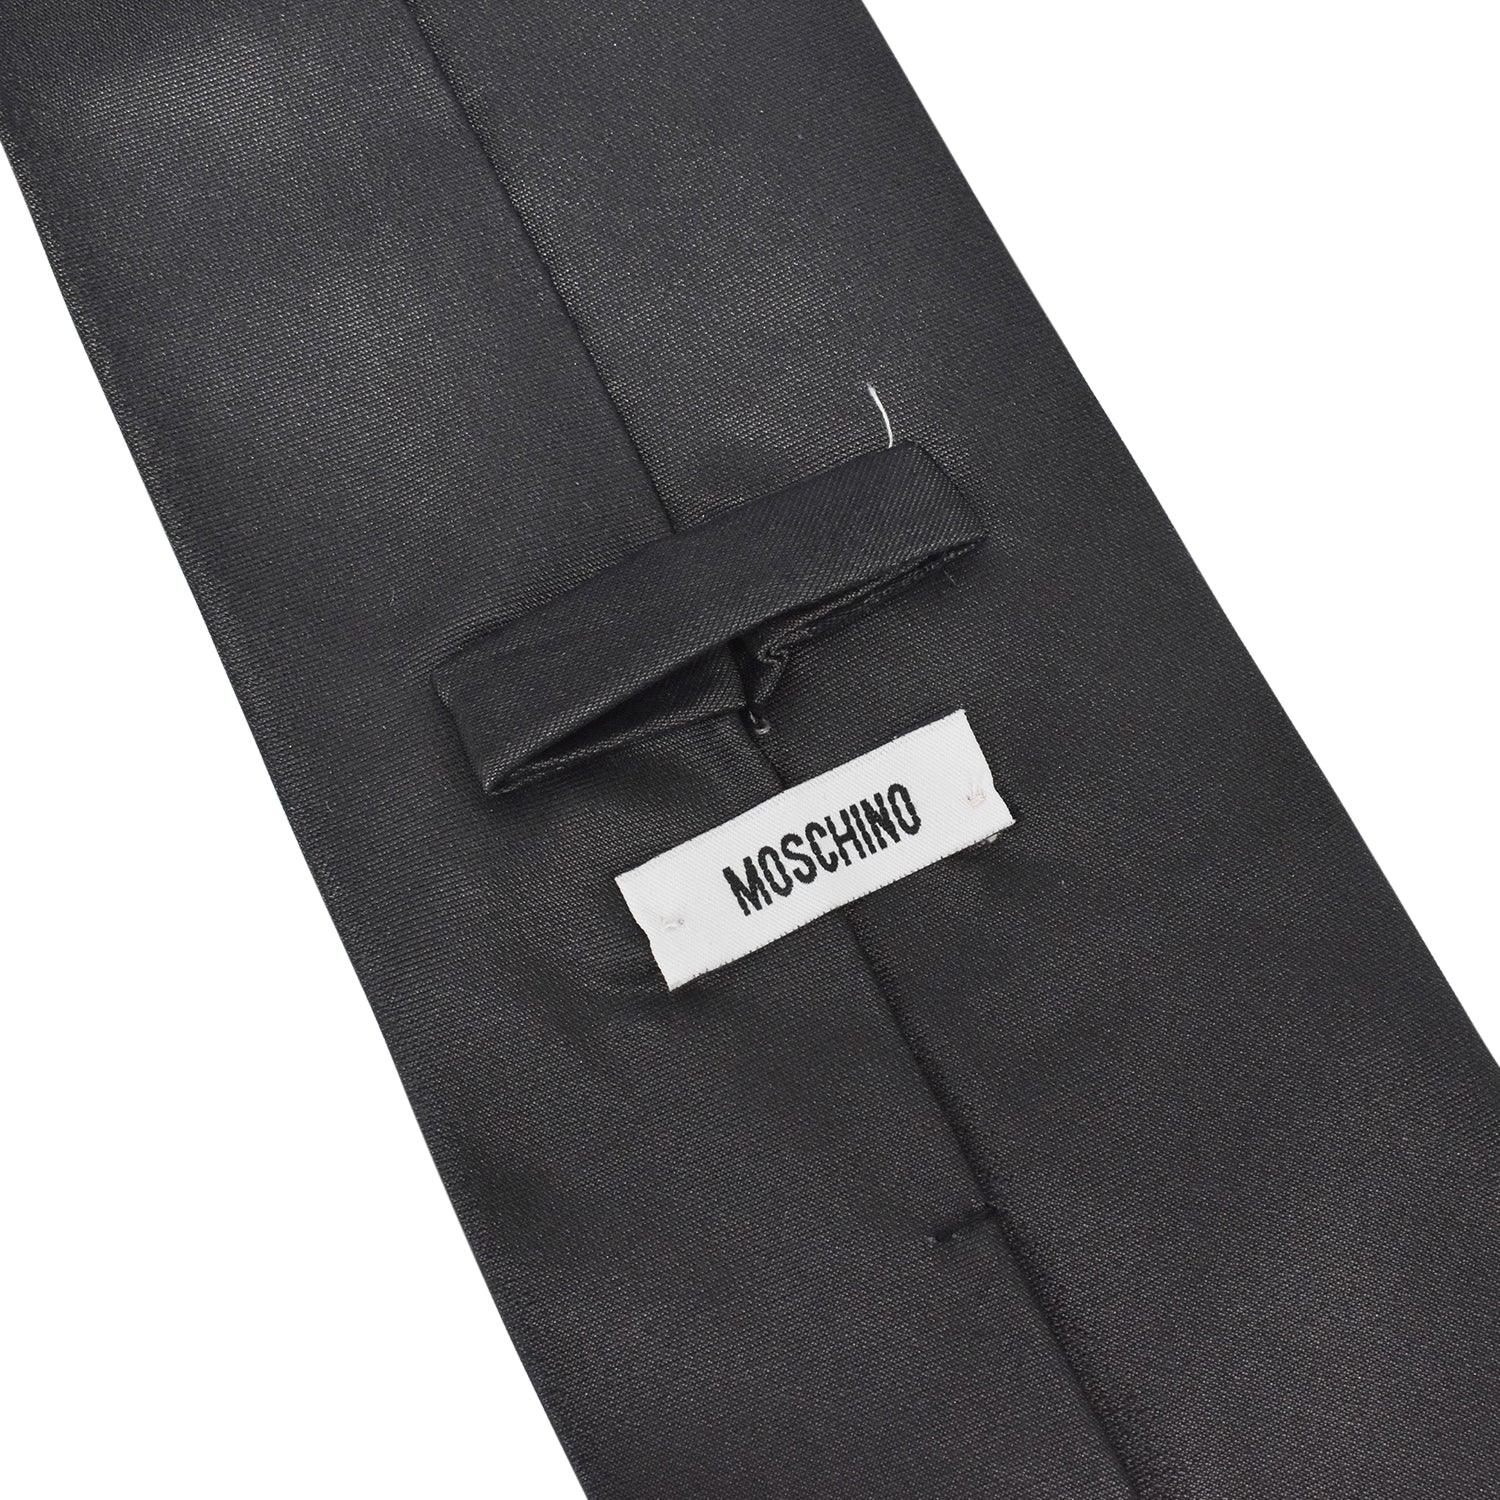 Moschino Tie - Fashionably Yours